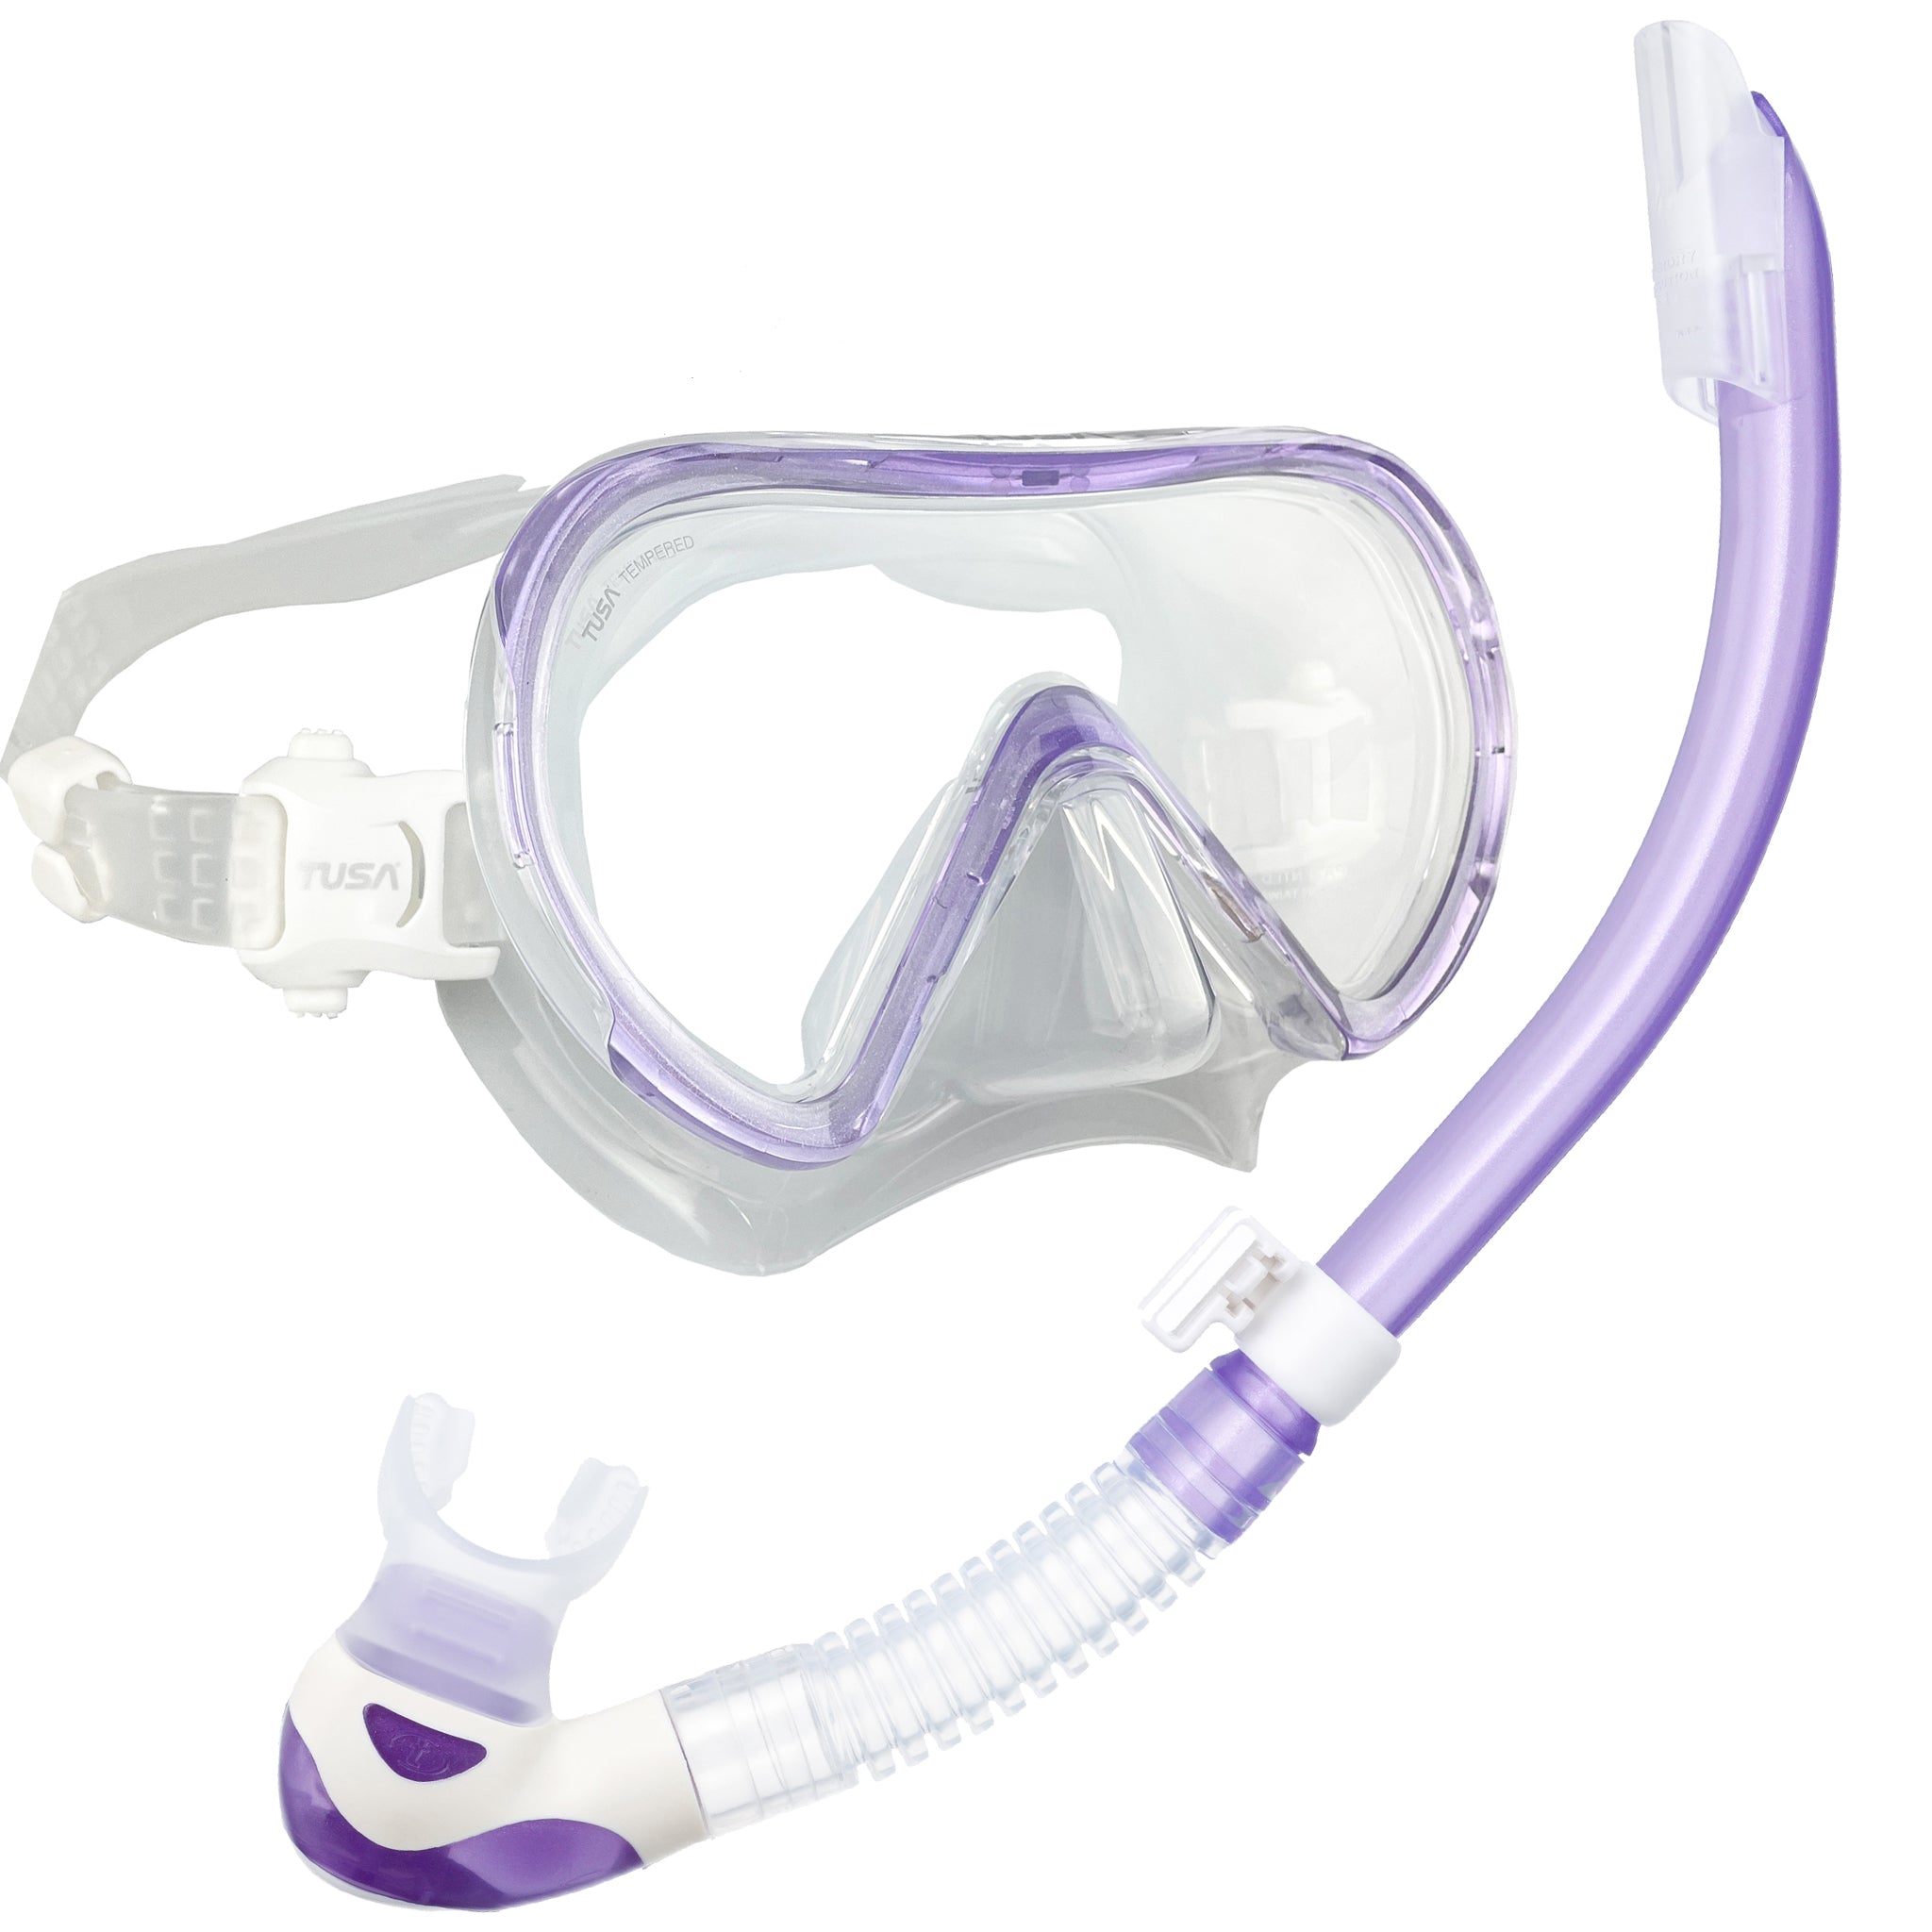 TUSA Ino Diving and Snorkelling Mask with Tusa Platina II Hyperdry Snorkel